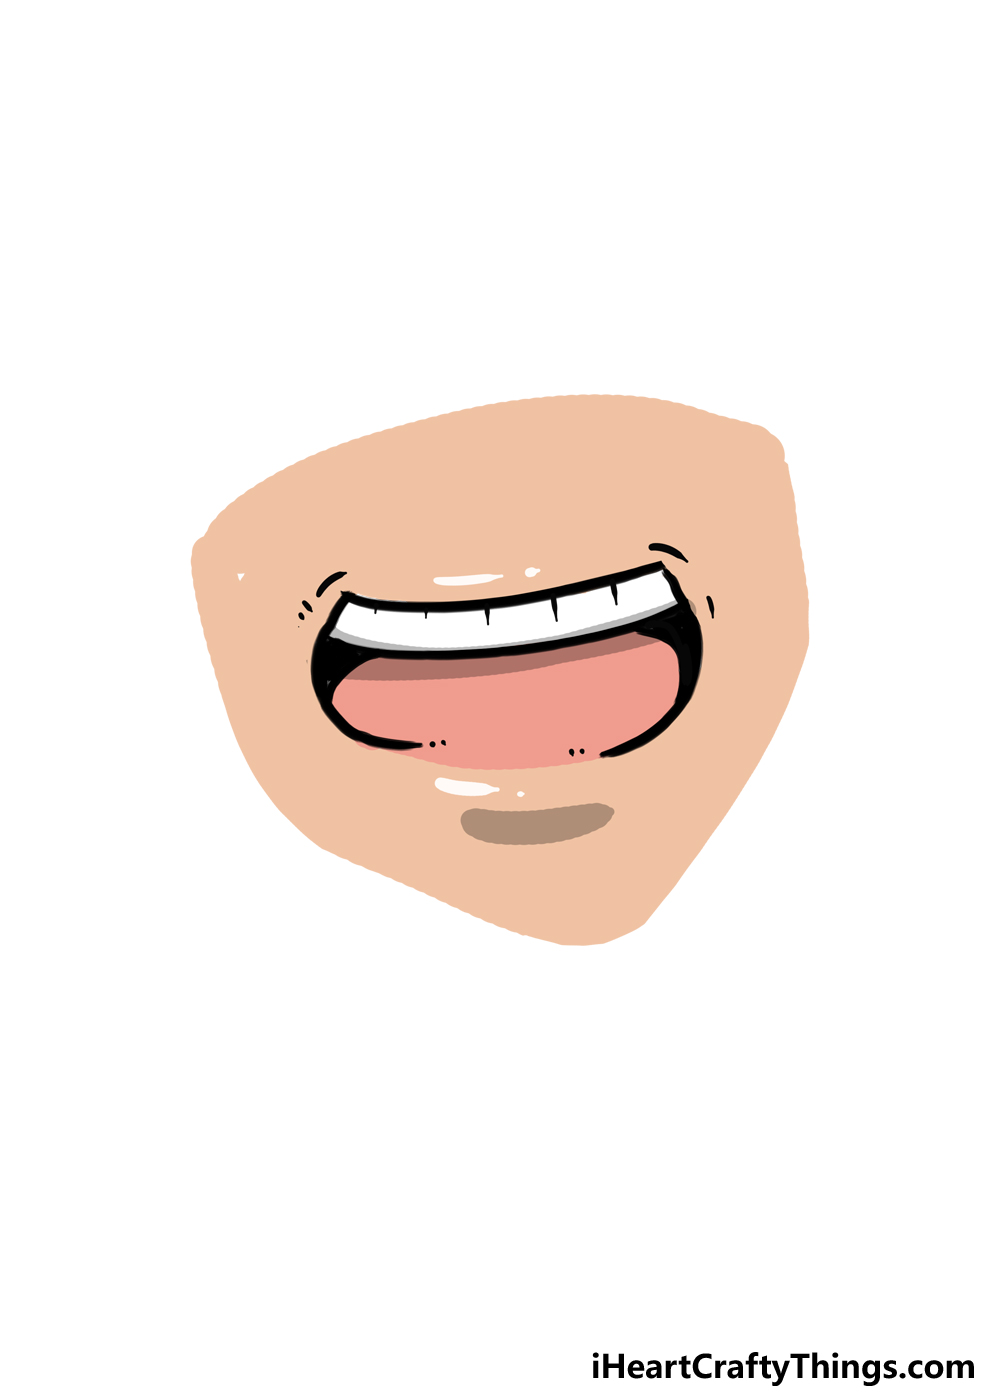 Anime Mouth Vector Art Icons and Graphics for Free Download